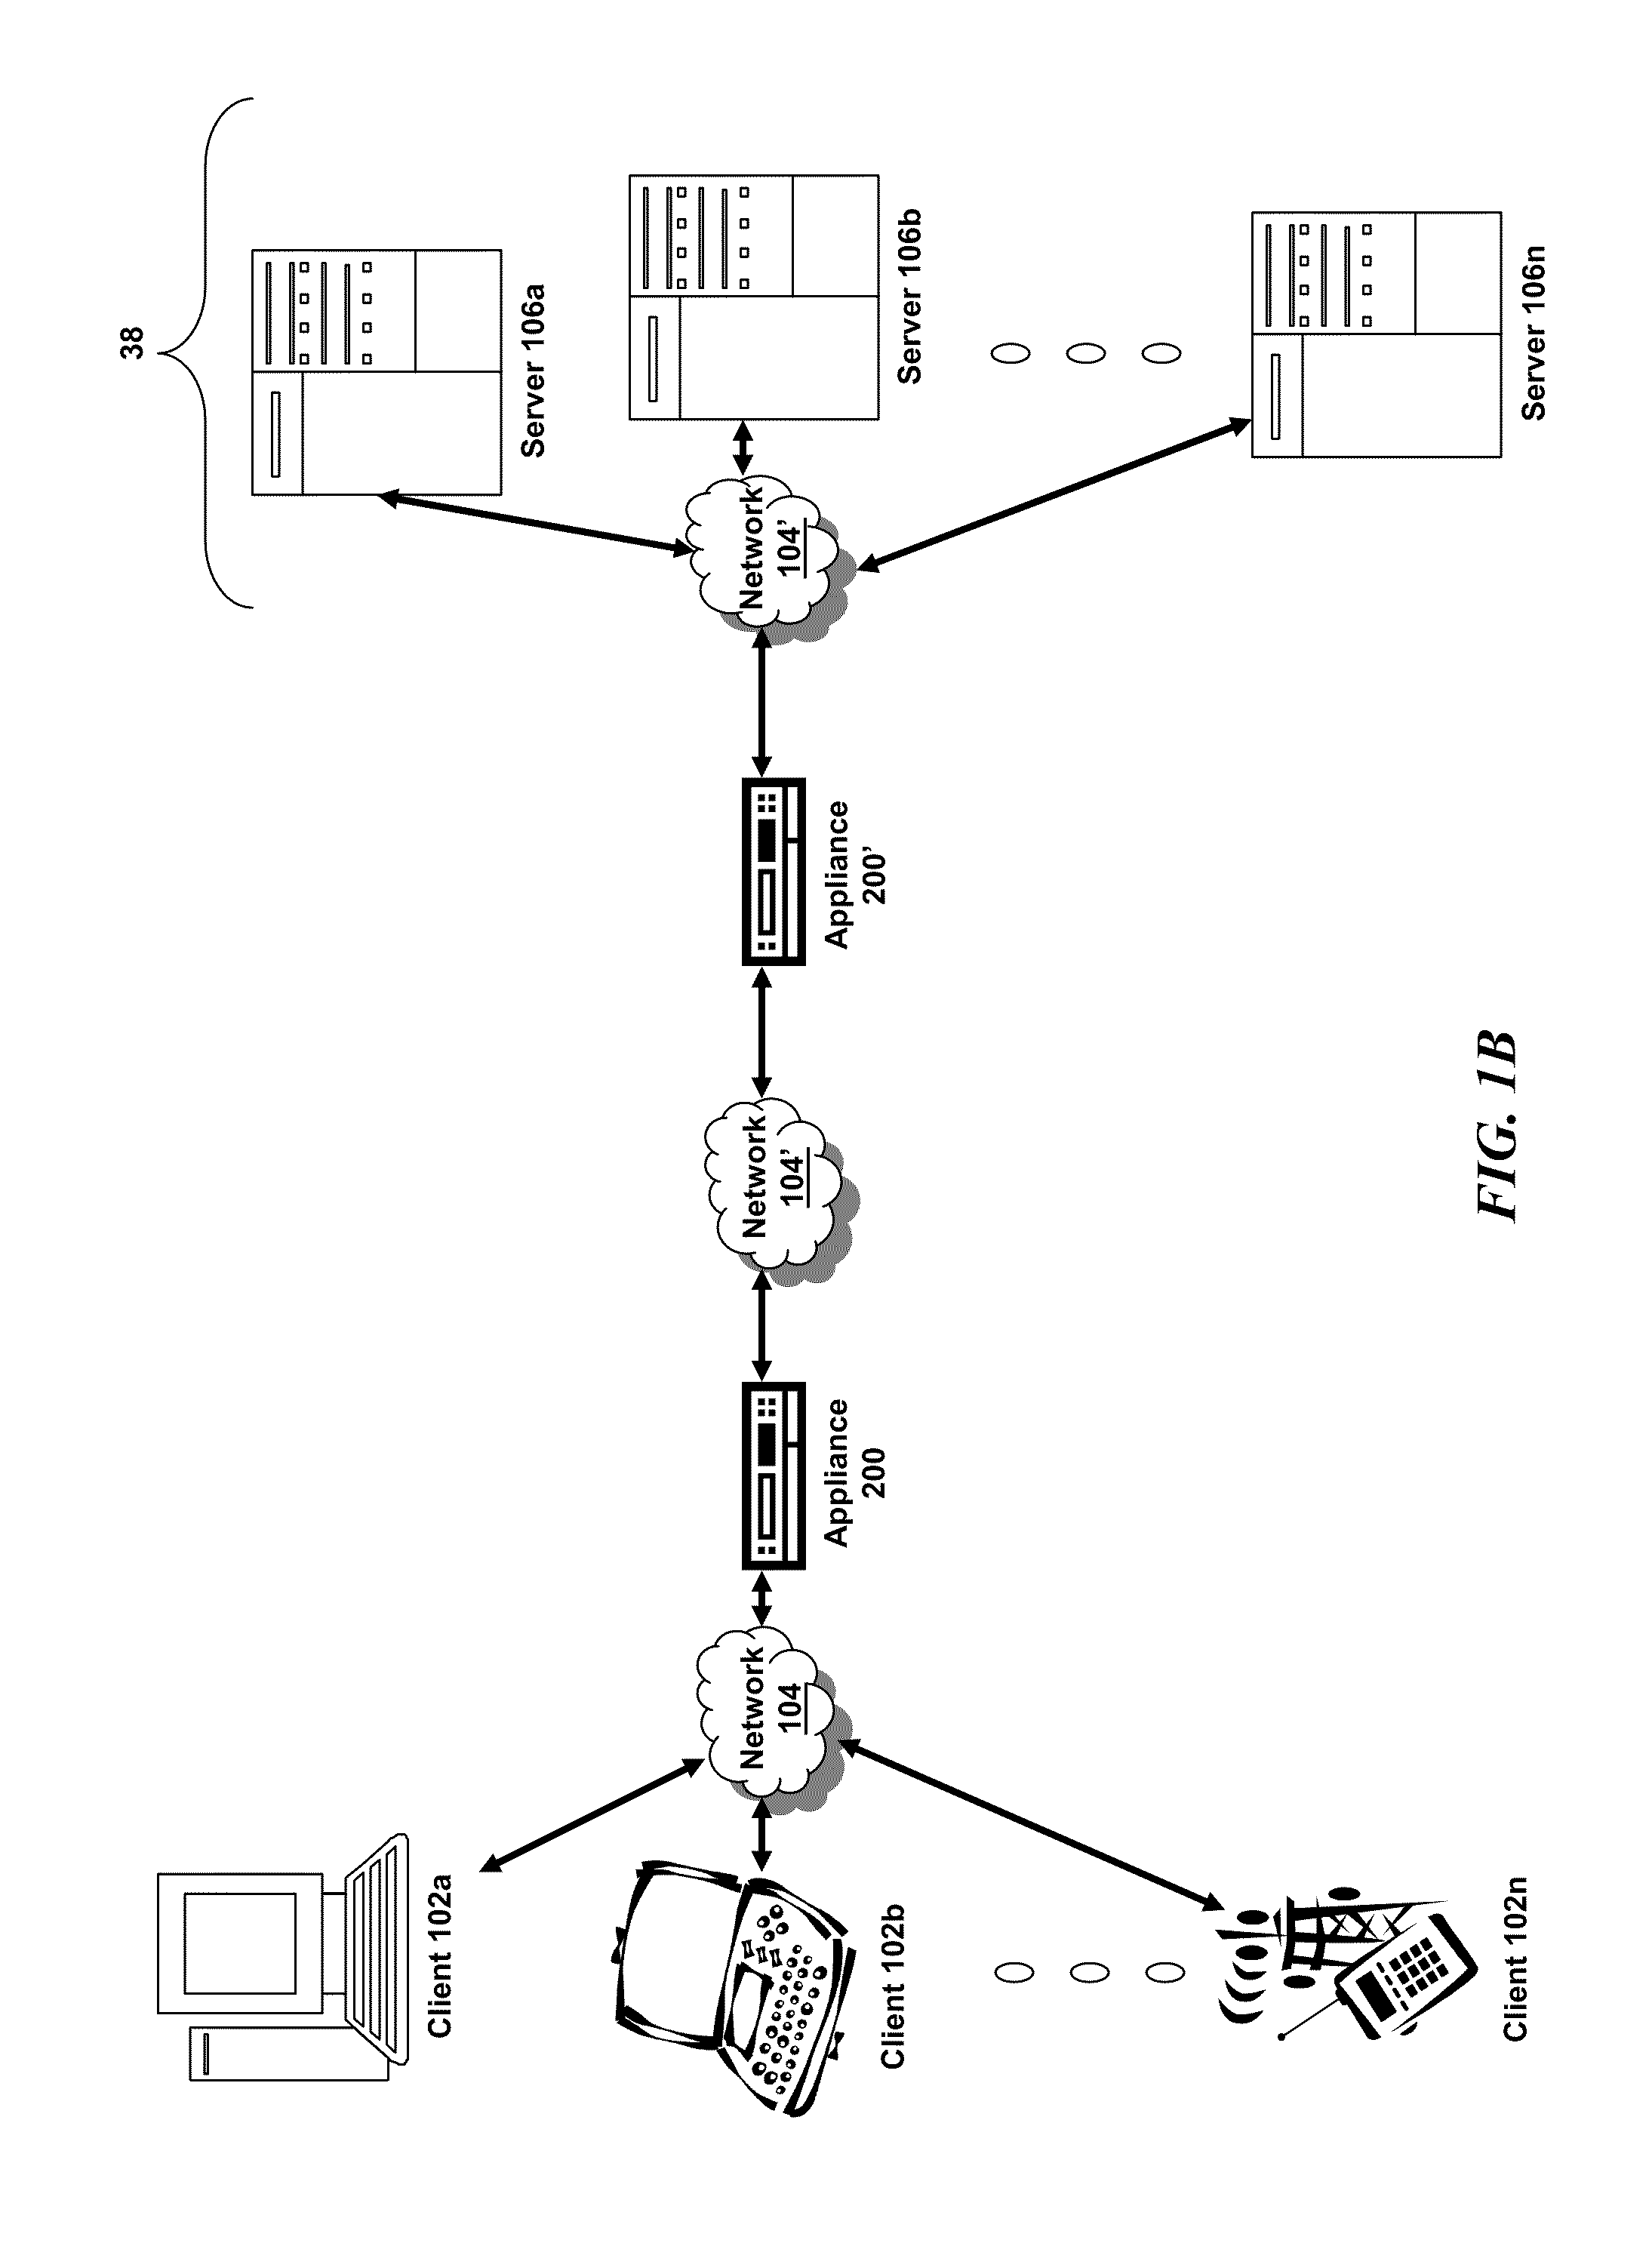 Systems and Methods for Providing Single Sign On Access to Enterprise SAAS and Cloud Hosted Applications